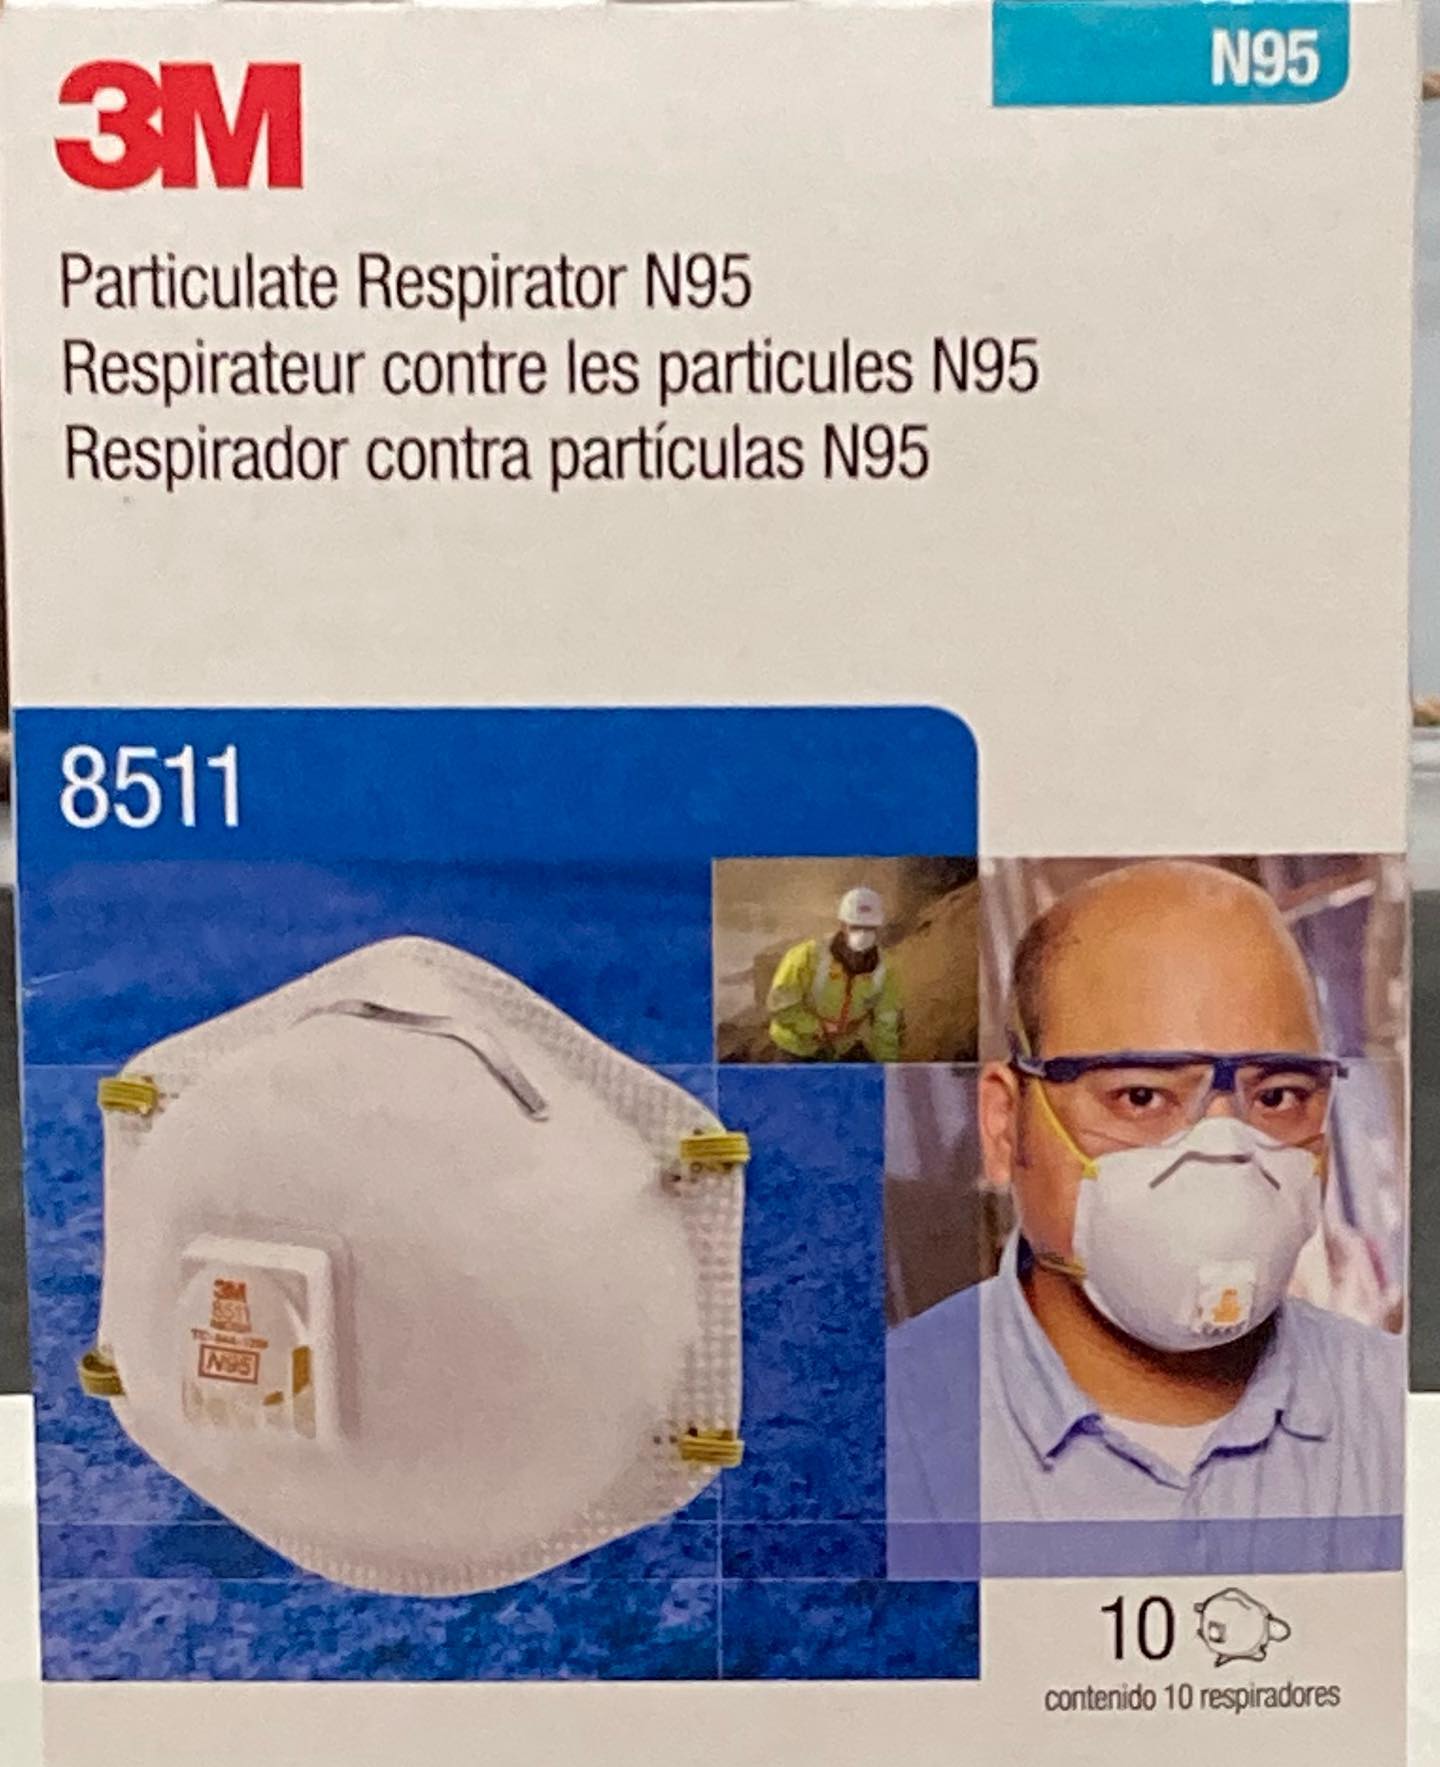 Keeping it Safe to workout and breathe . 
Contact us today to try a FREE 1-on-1 boxing workout and we will supply you with a @3m -N95- Respirator mask for you to keep and feel what it’s like to breathe again while working out . Call / text (781)727-9503 or email fitbox@outlook.com @tommymcinerney